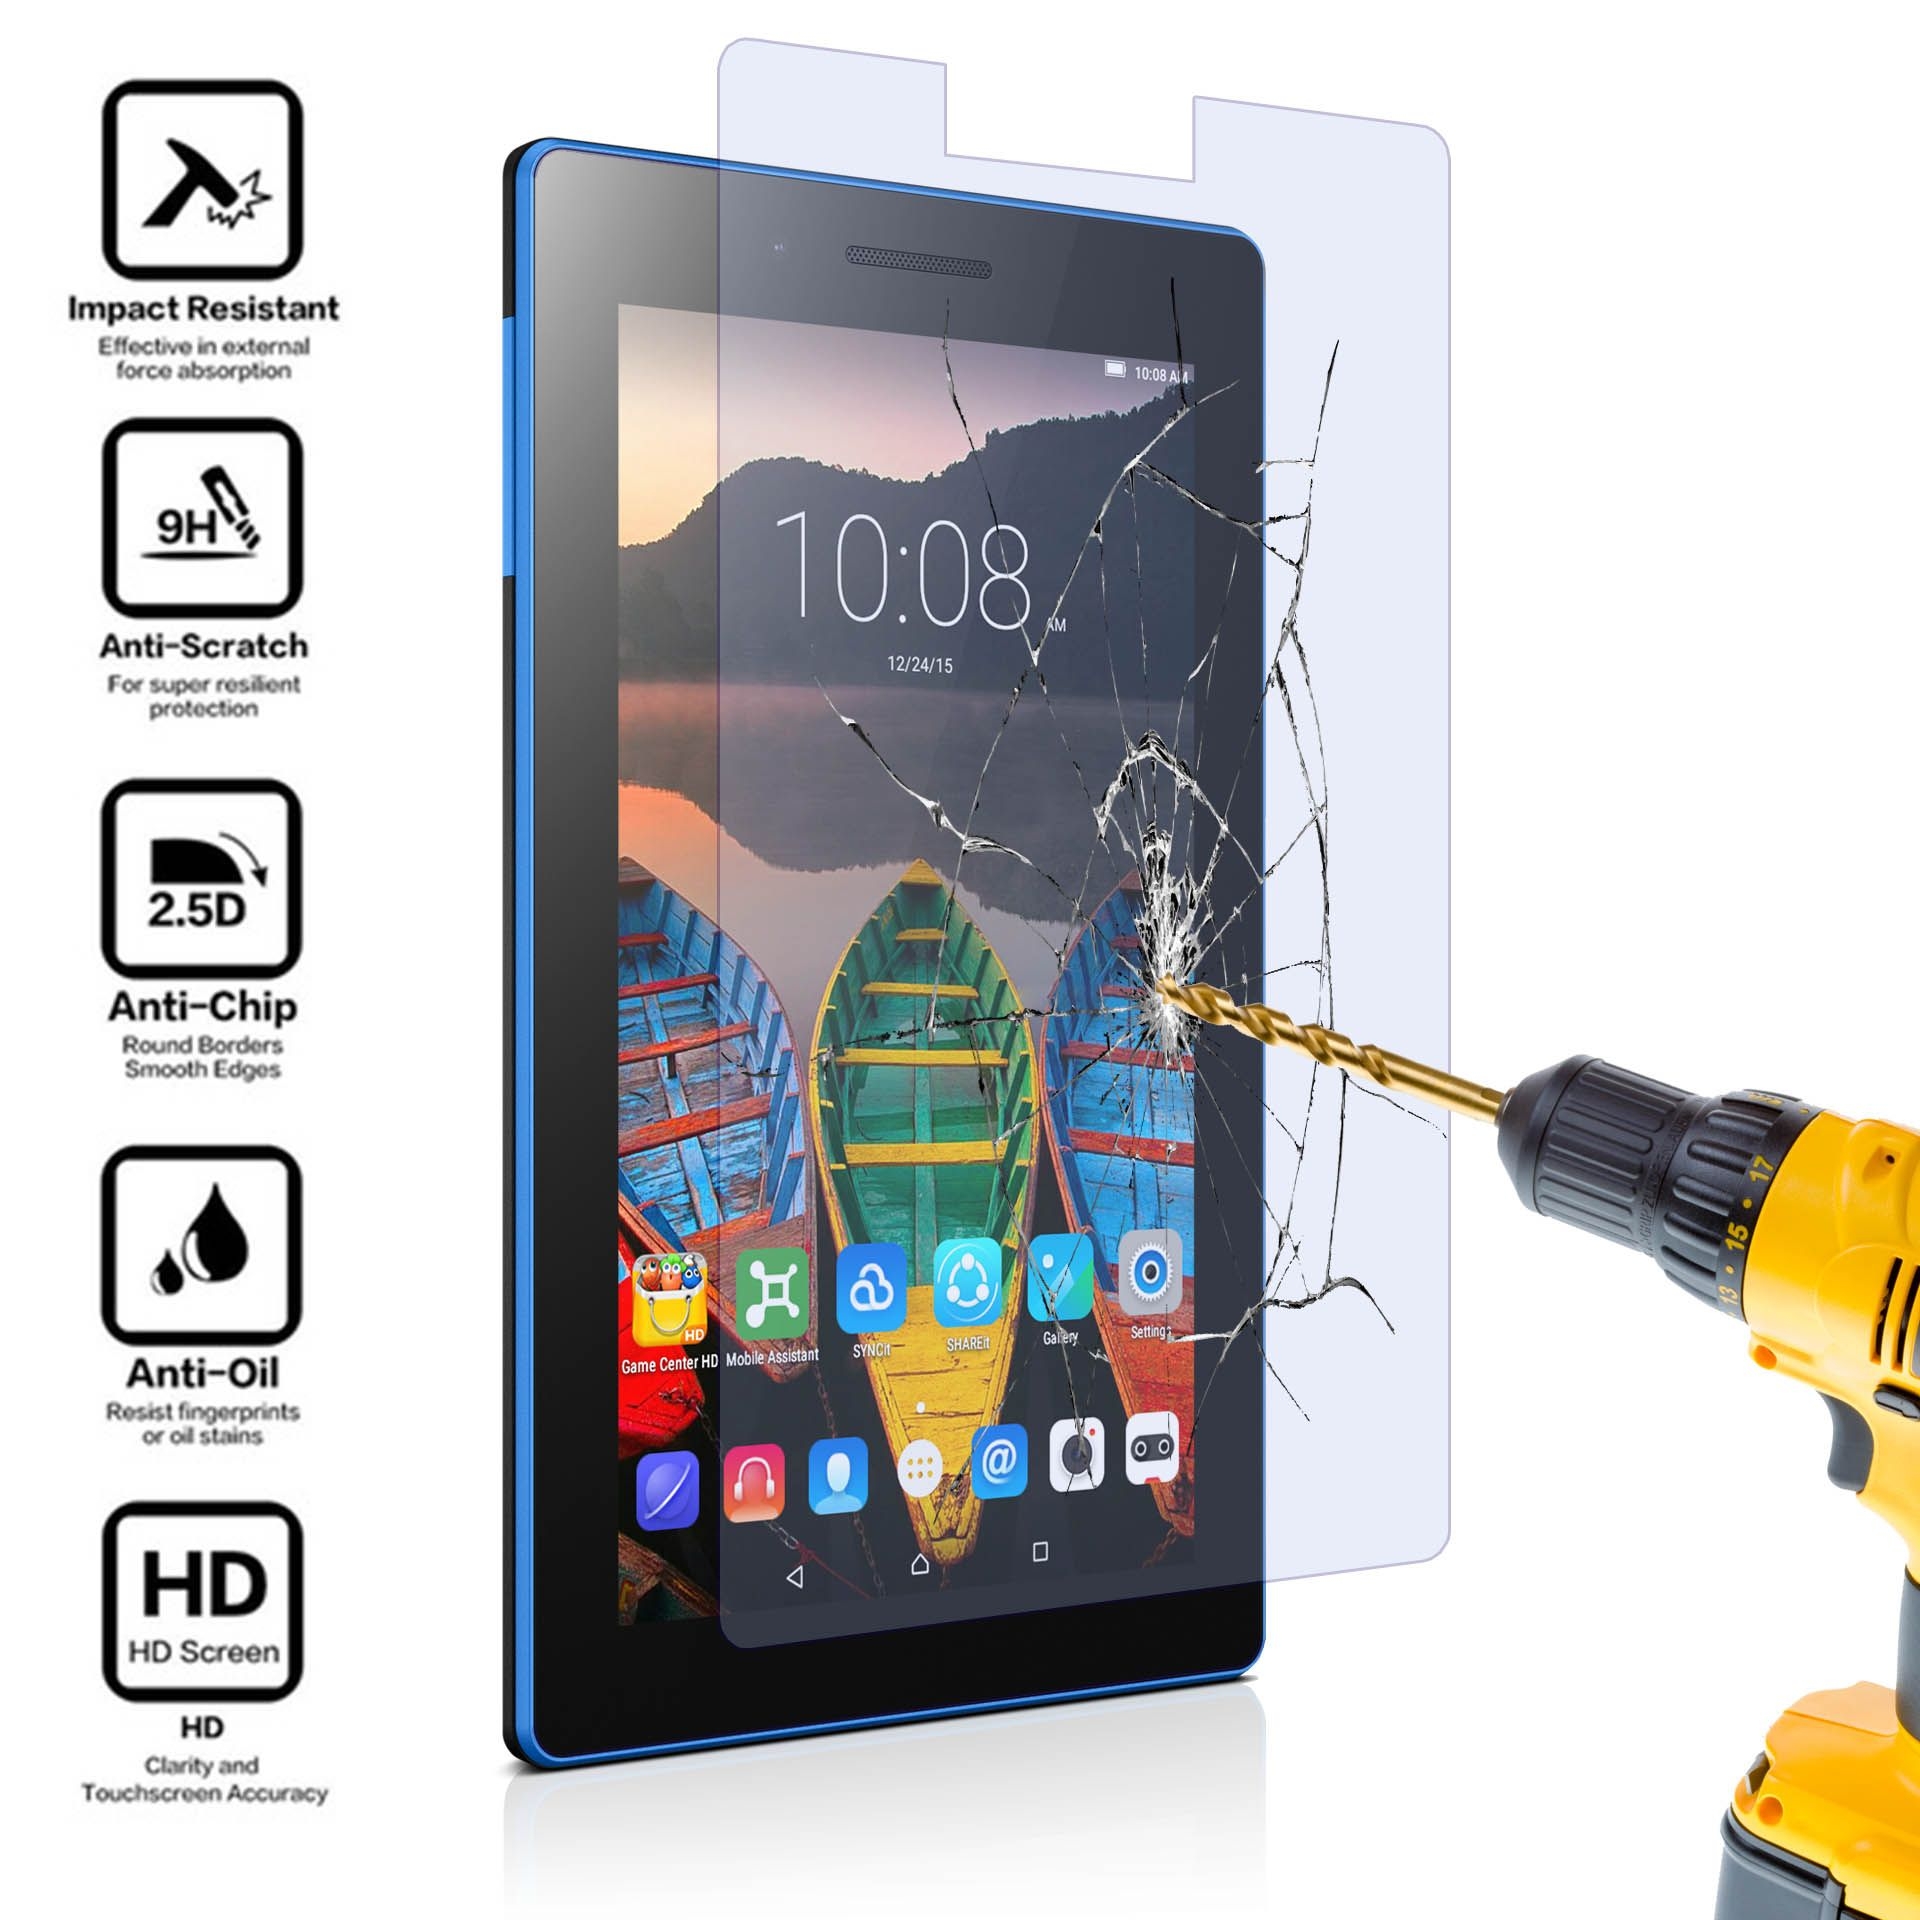 Tempered glass screen protector for tablets – Samsung Tab A10.1 T580